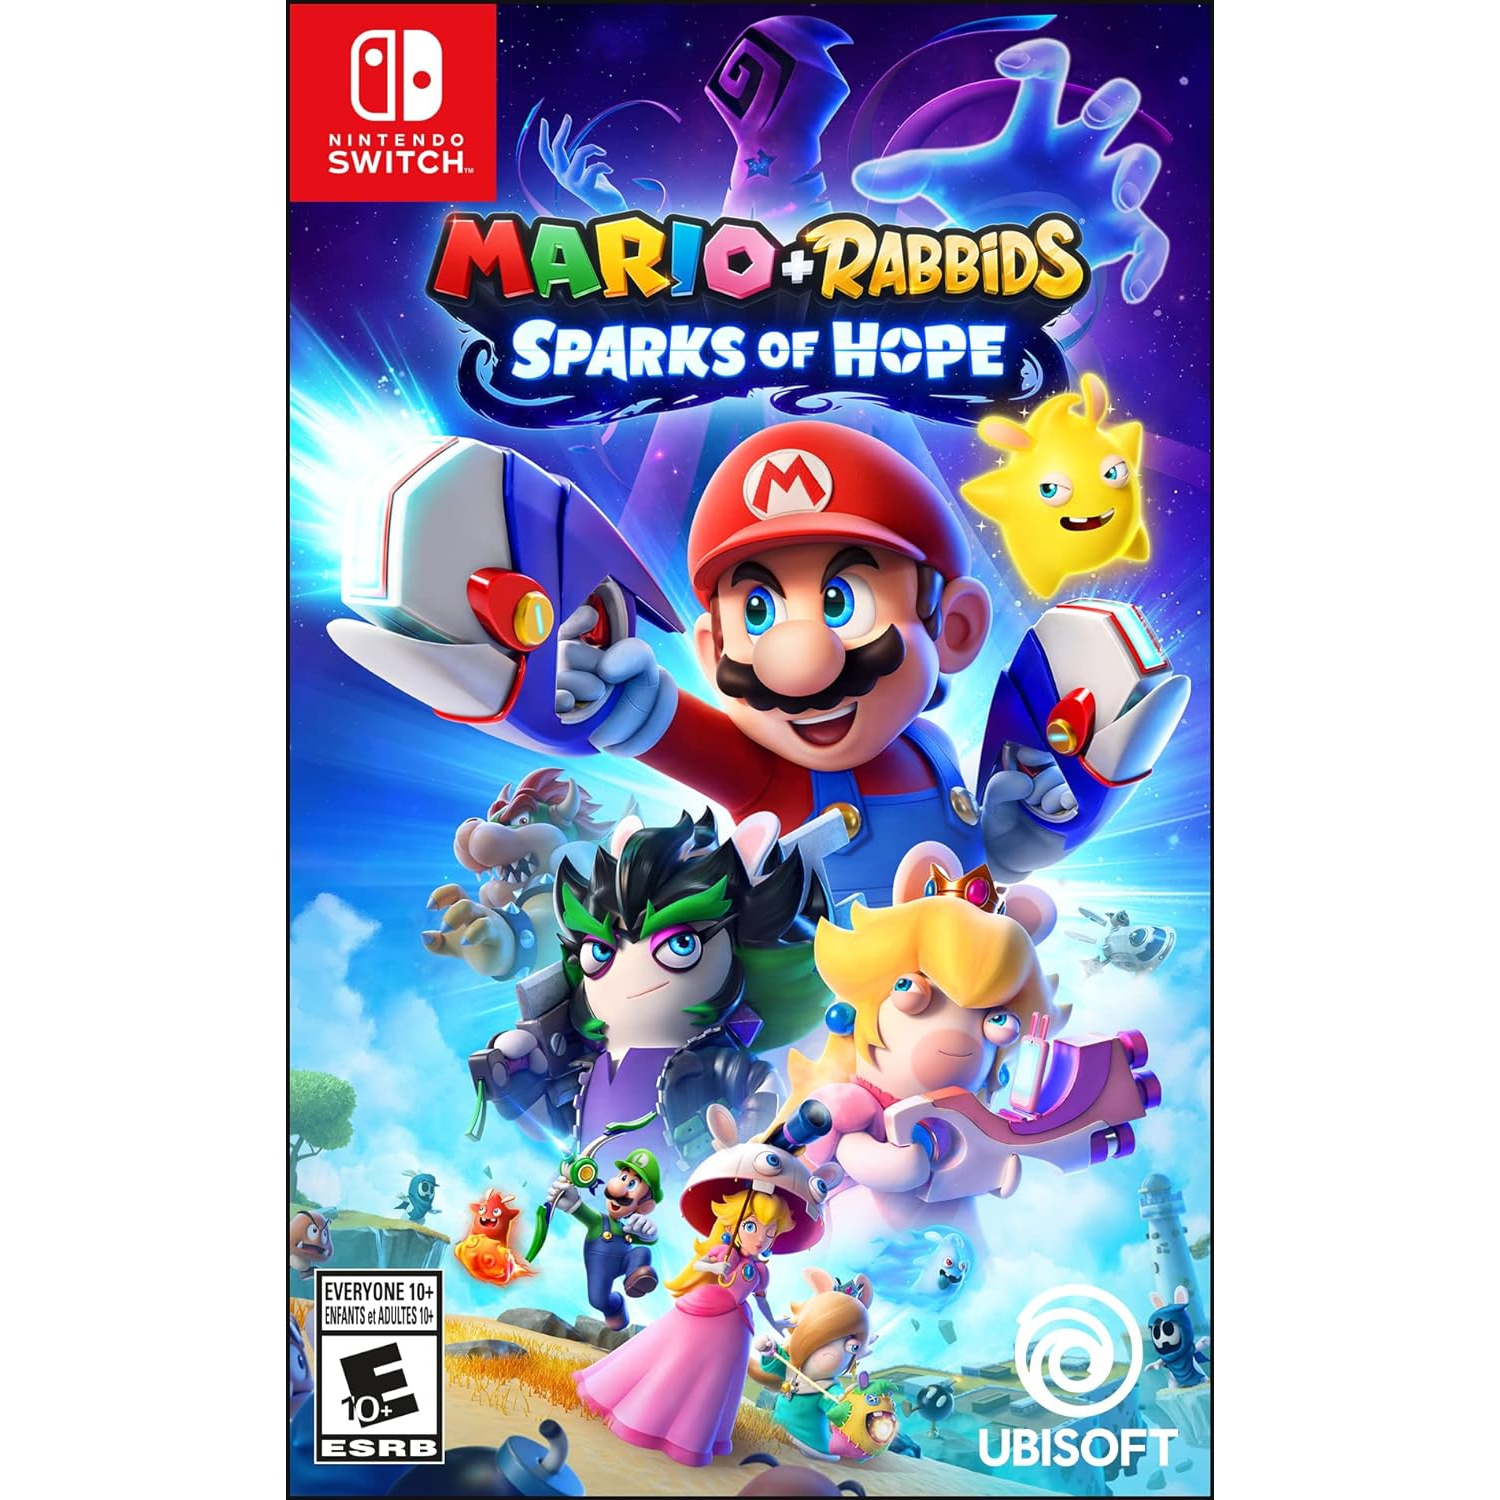 Mario + Rabbids Sparks of Hope - Nintendo Switch Standard Edition